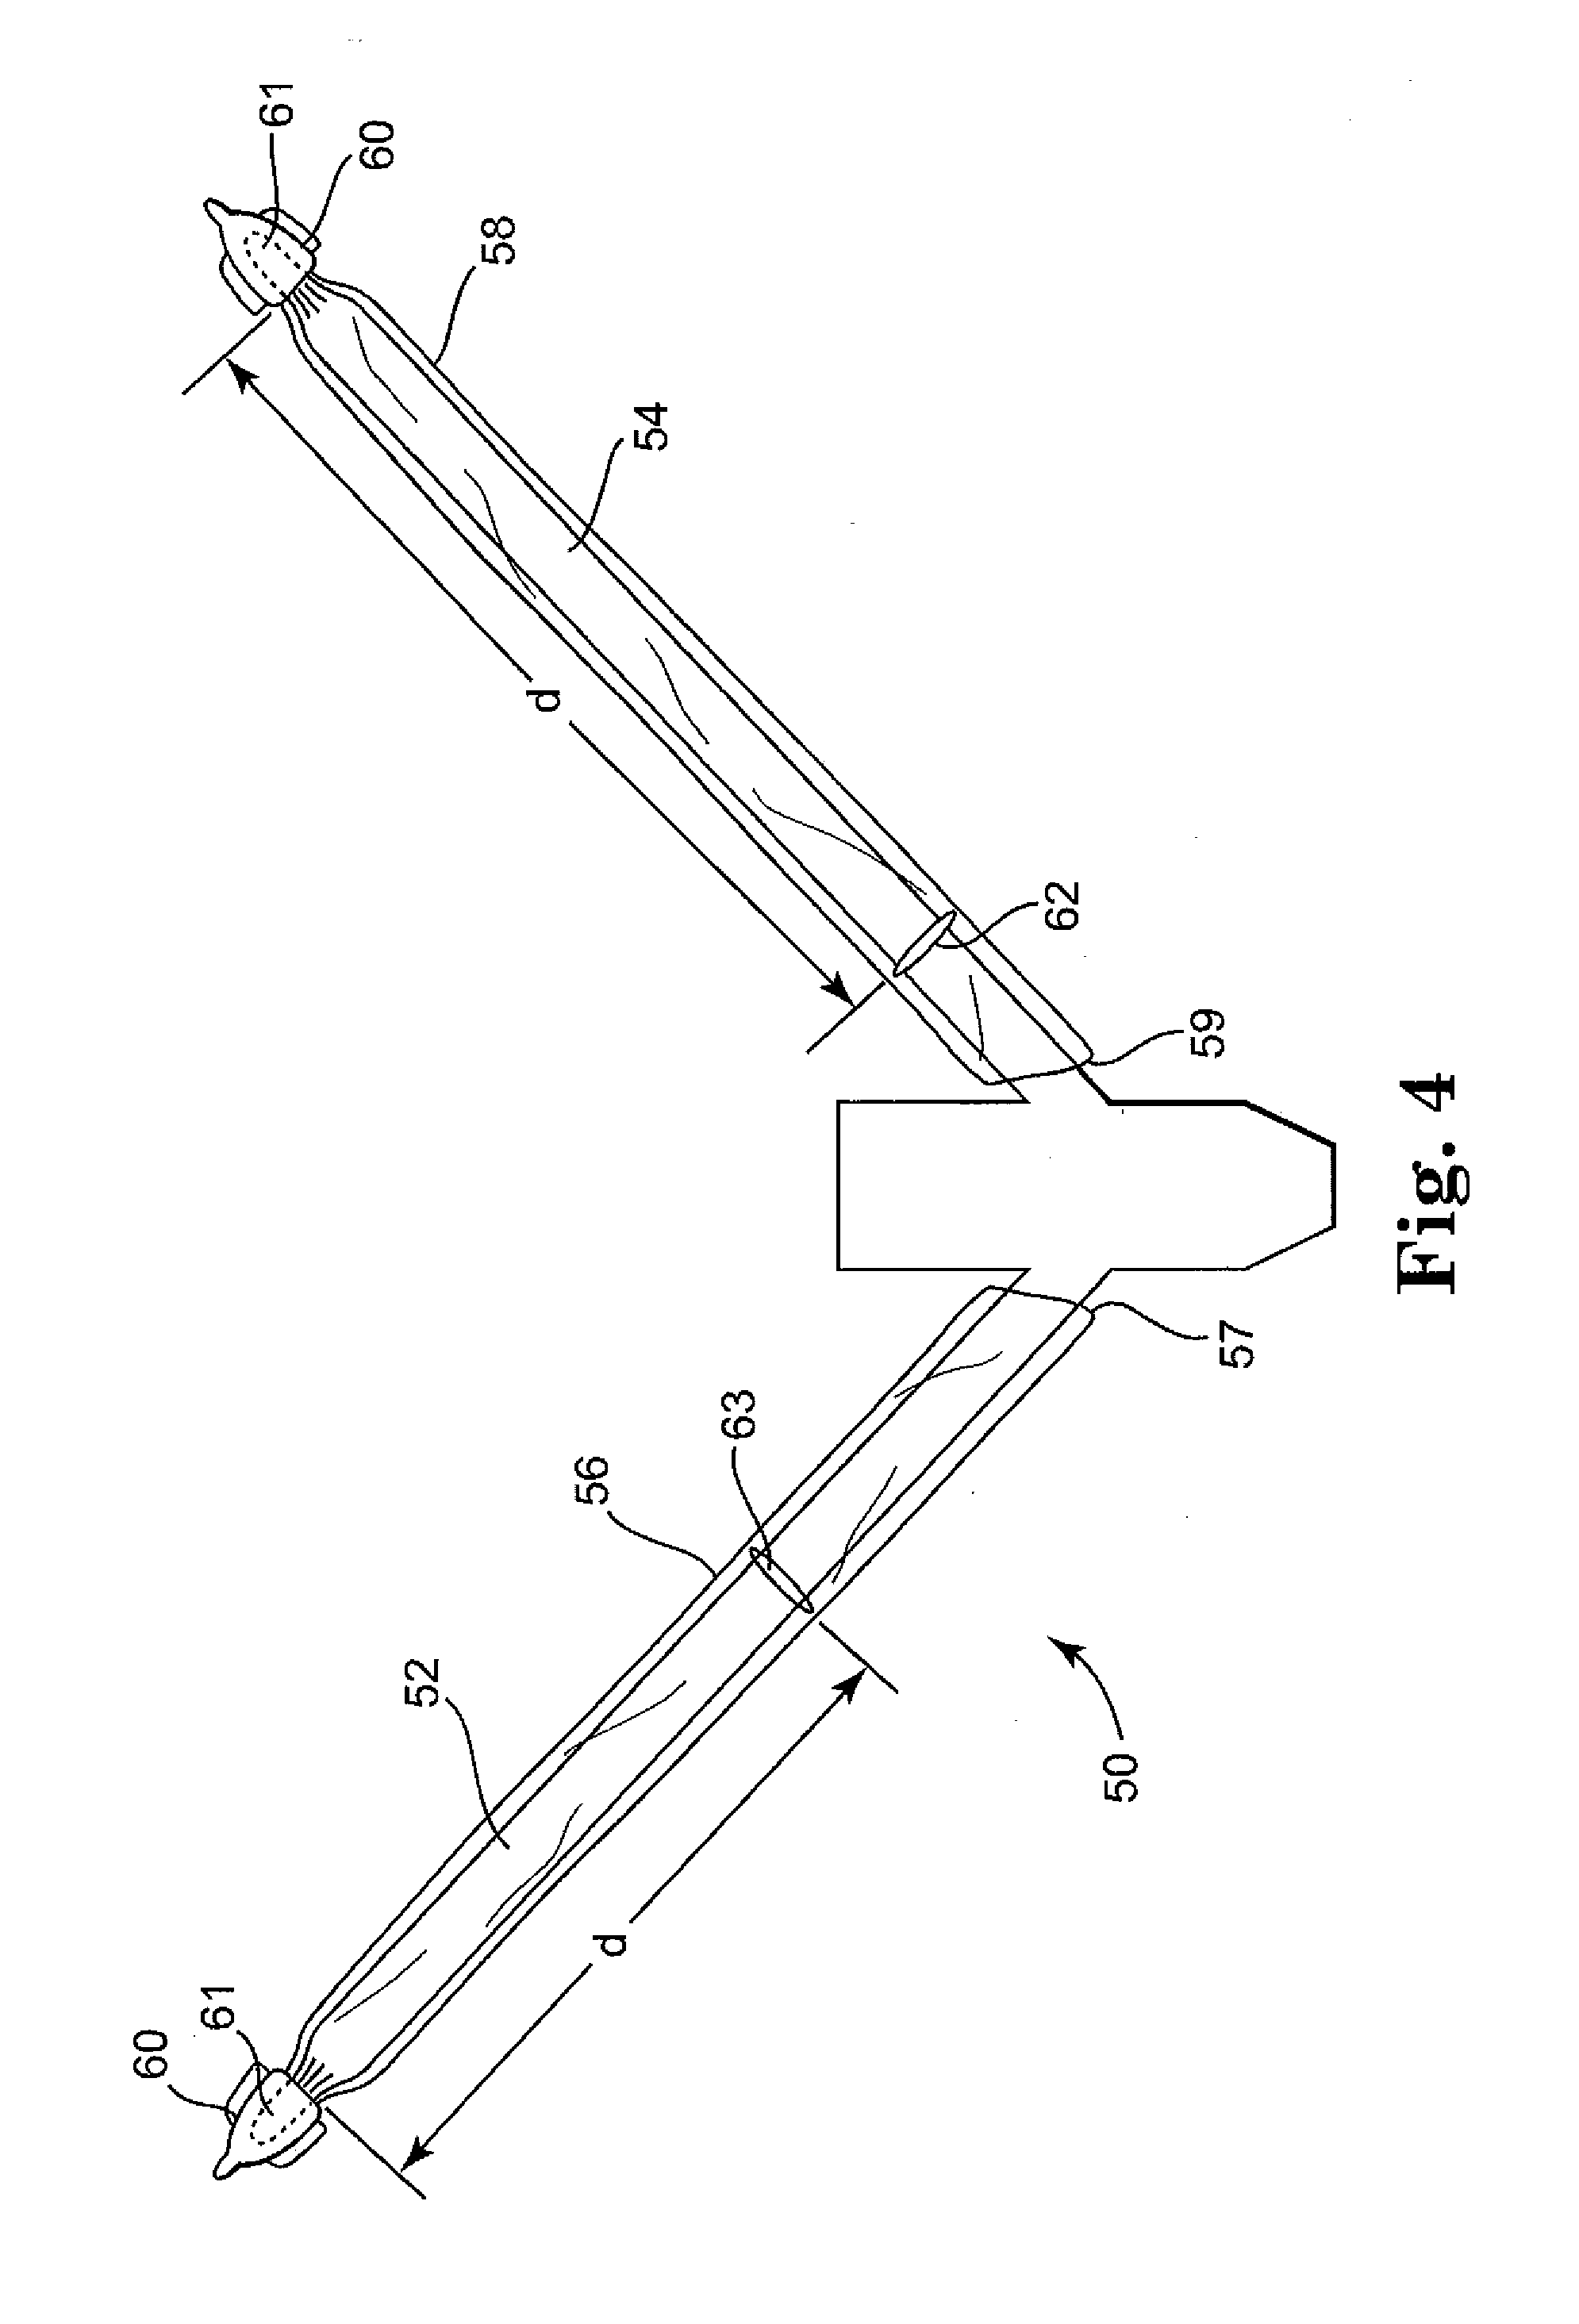 Articles, devices, and methods for pelvic surgery